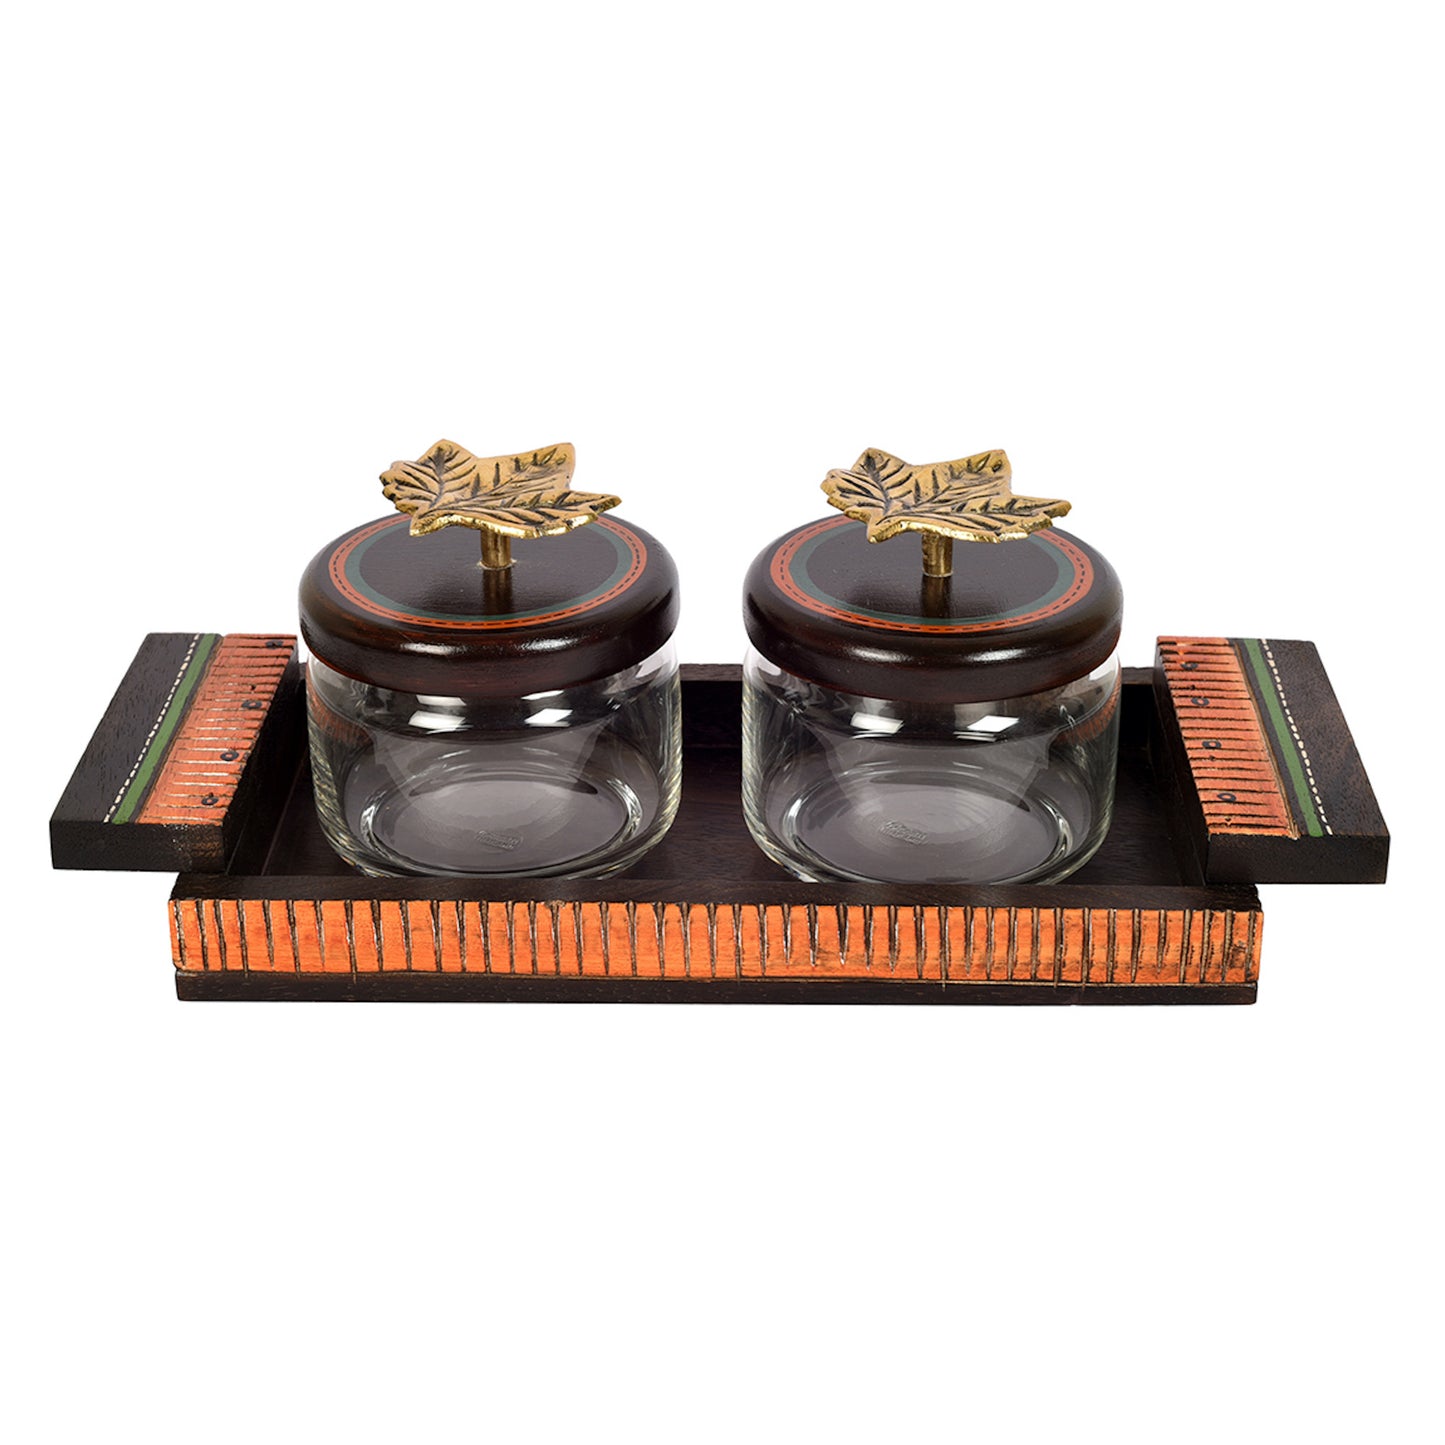 Tray in Wood & 2 Glass Jaars with Brass Handle Lids (Set of 3) (12x5)